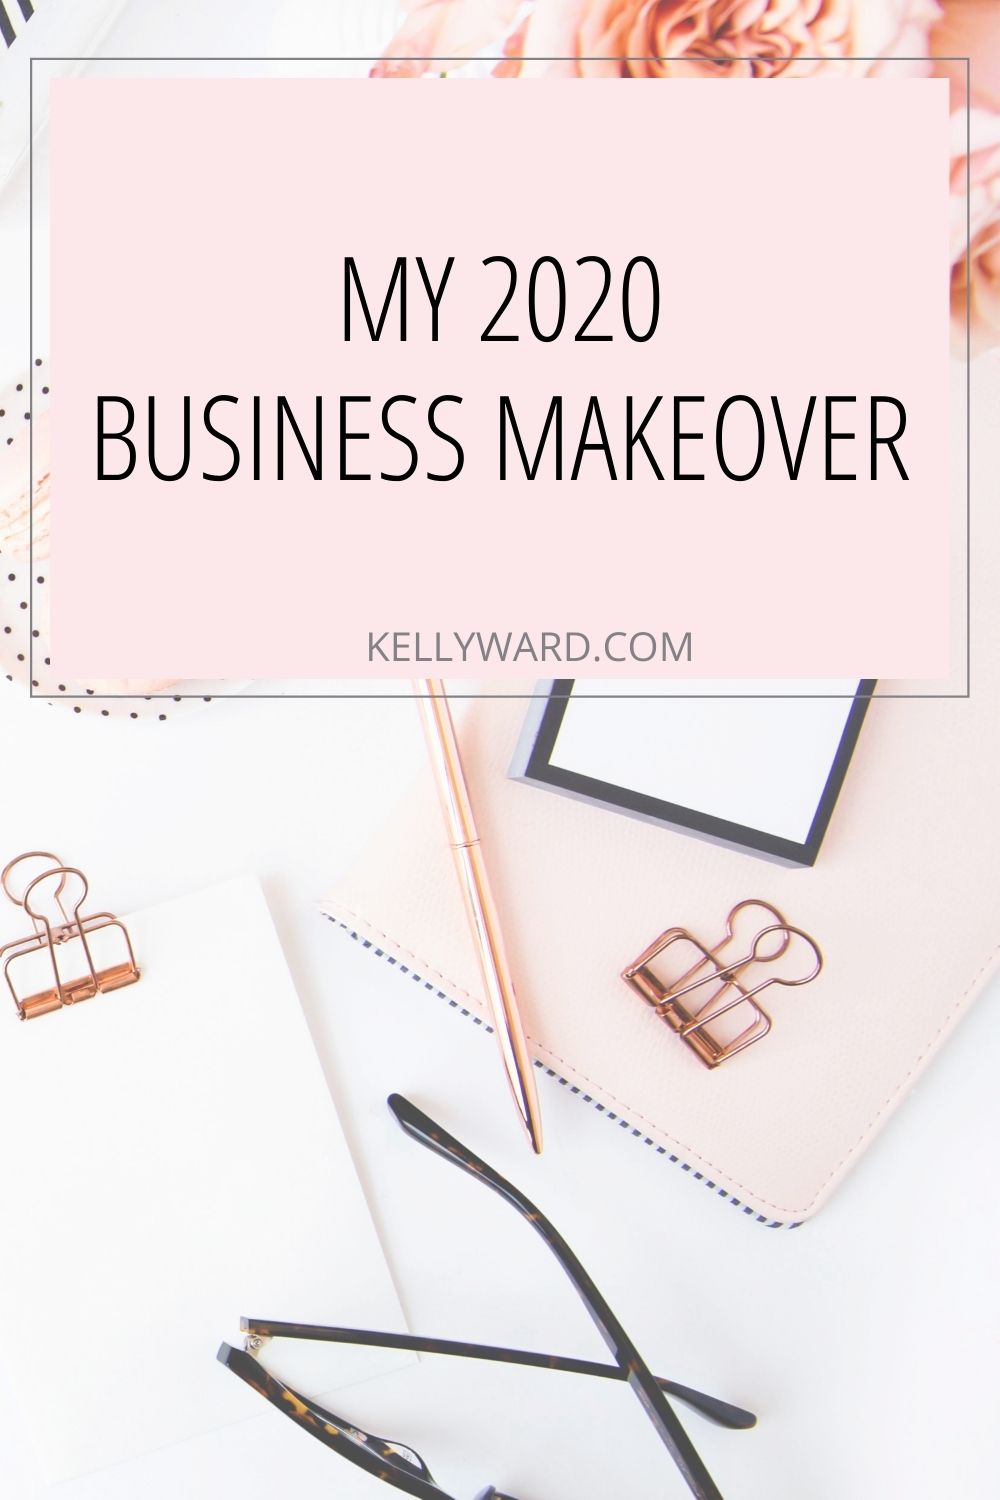 My 2020 Business Makeover